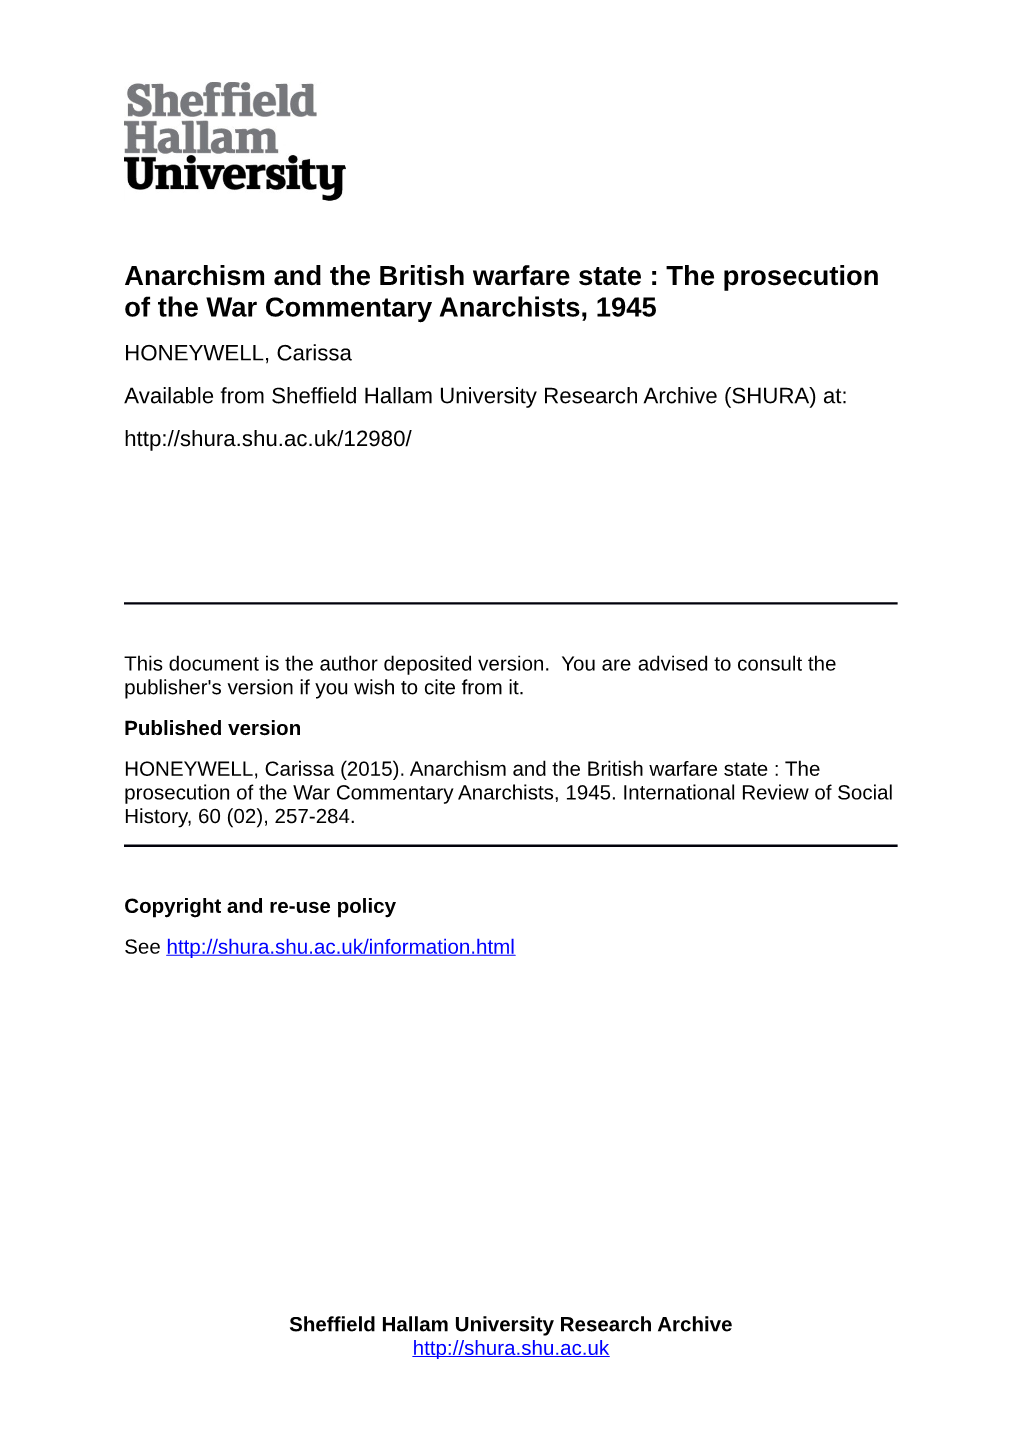 Anarchism and the British Warfare State : the Prosecution of the War